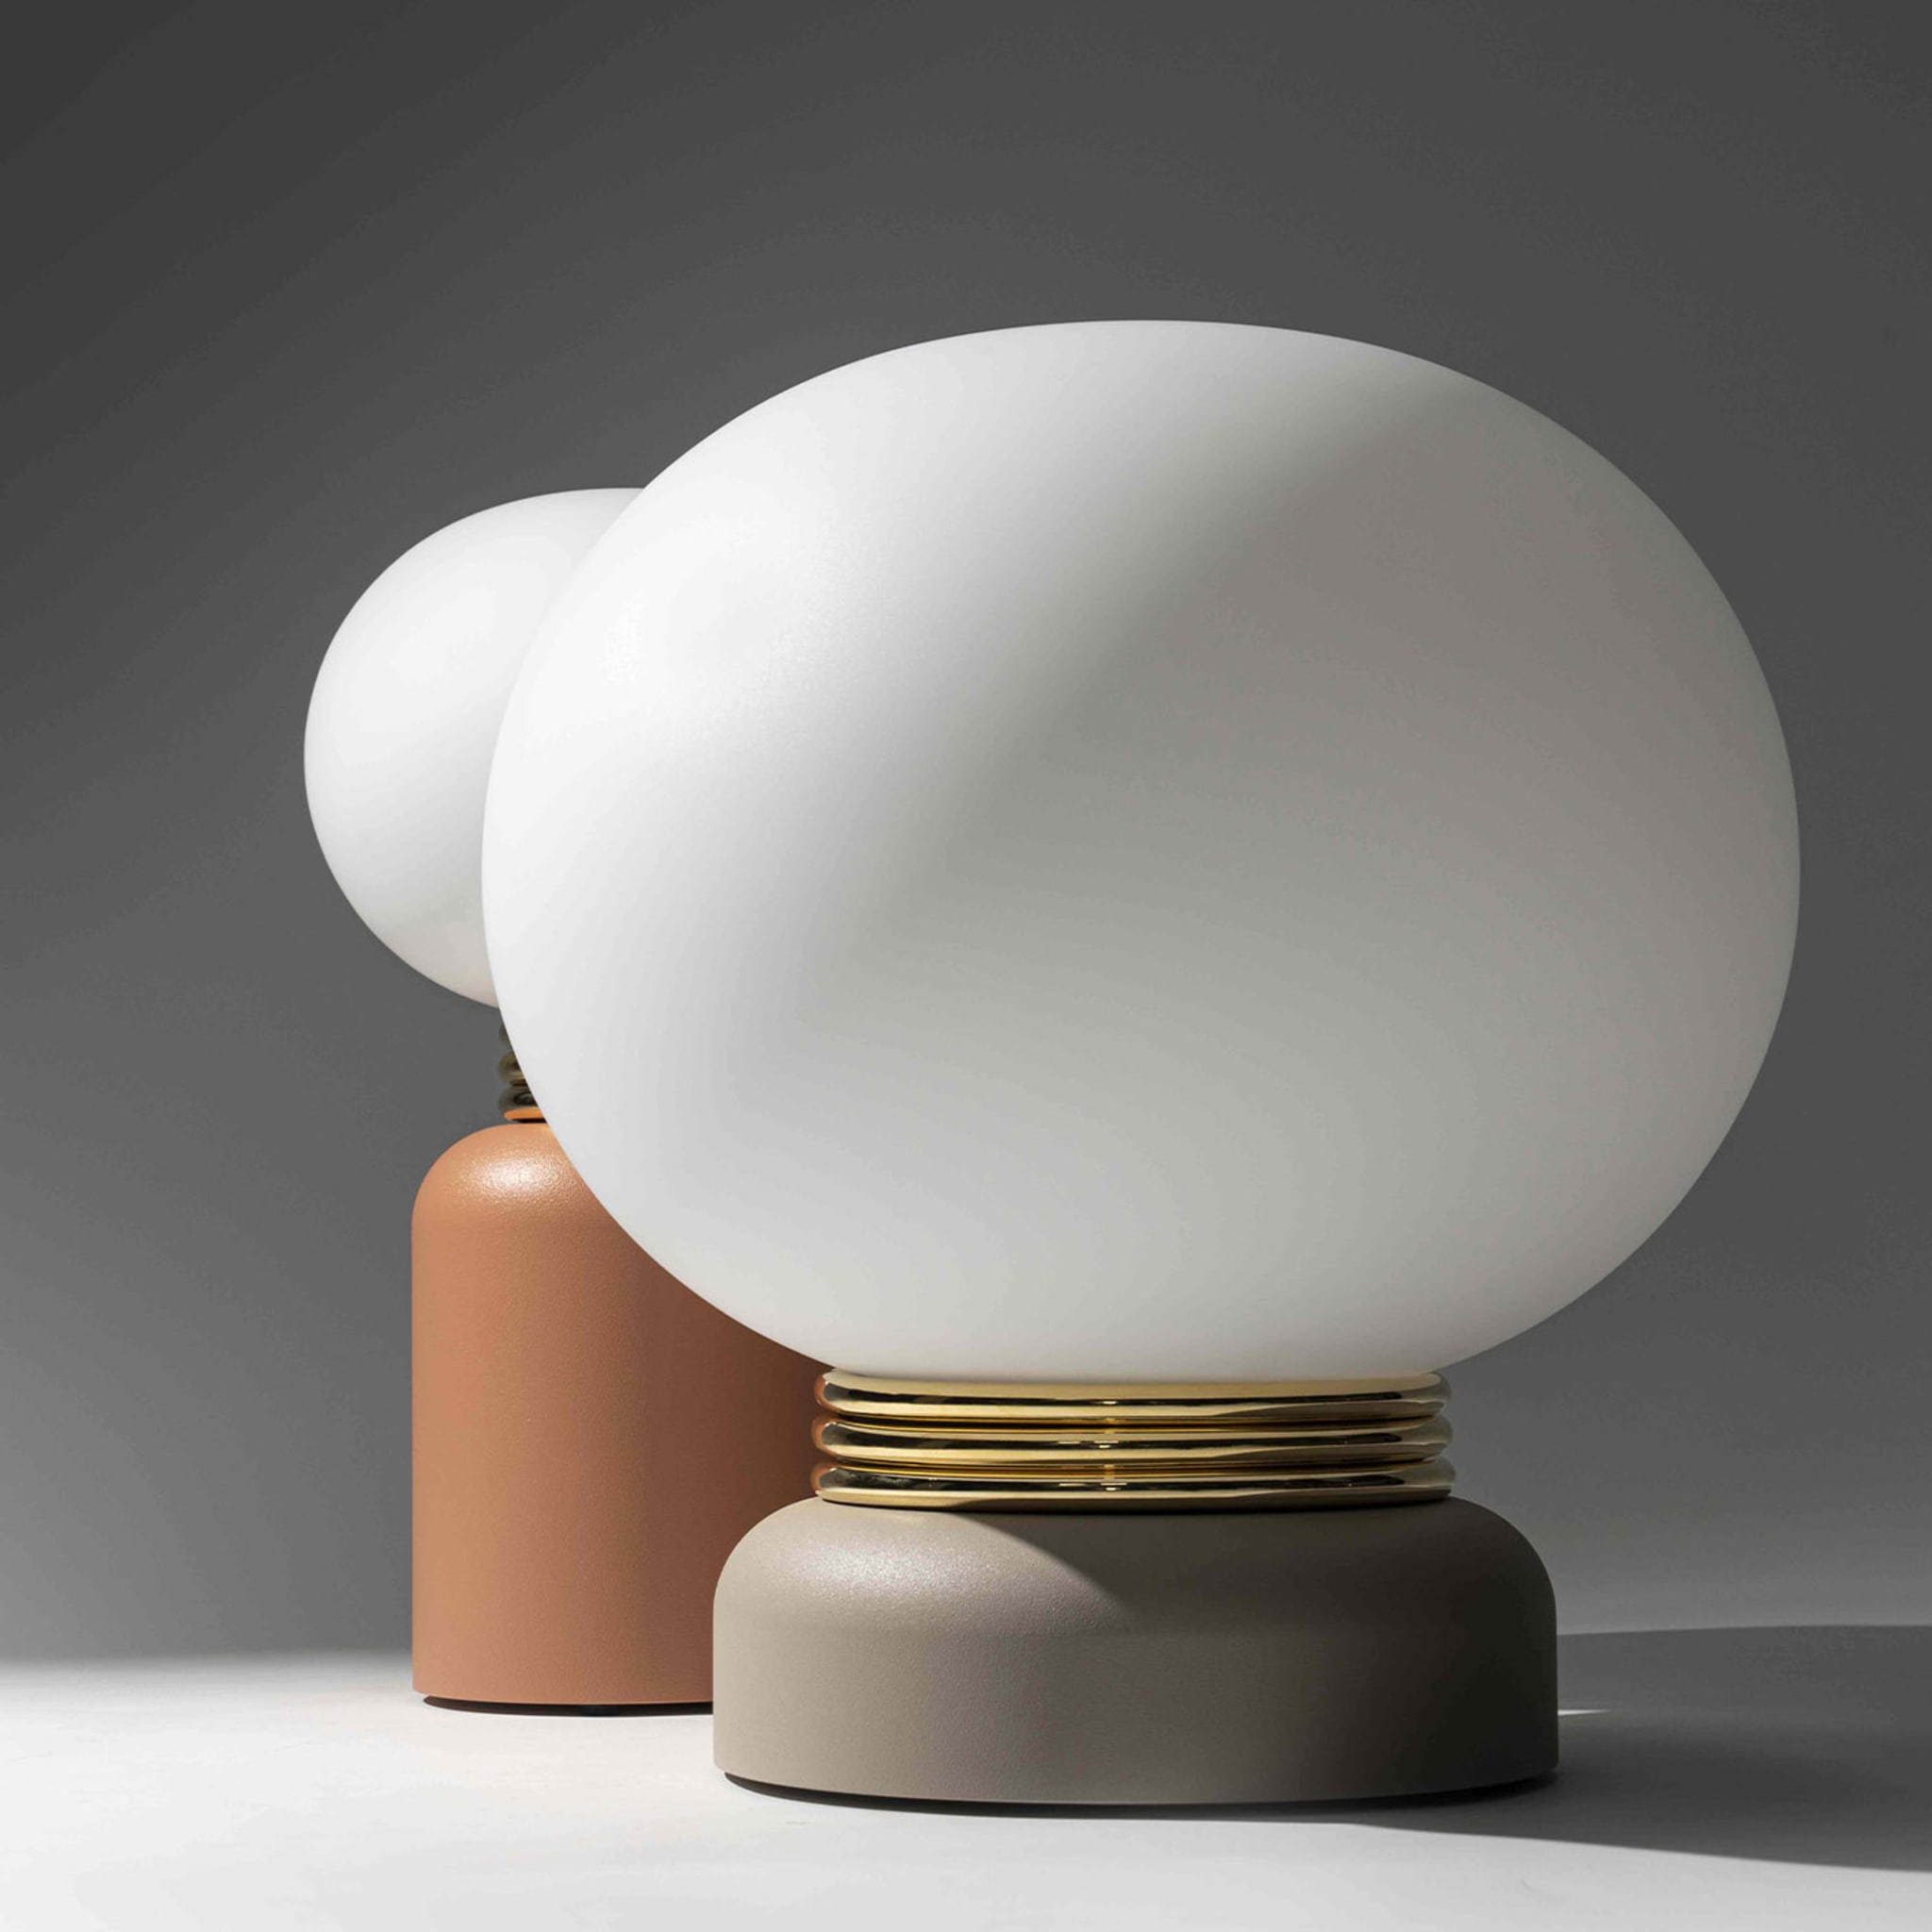 Karen S Taupe Small Lamp by Luca Barengo - Alternative view 5